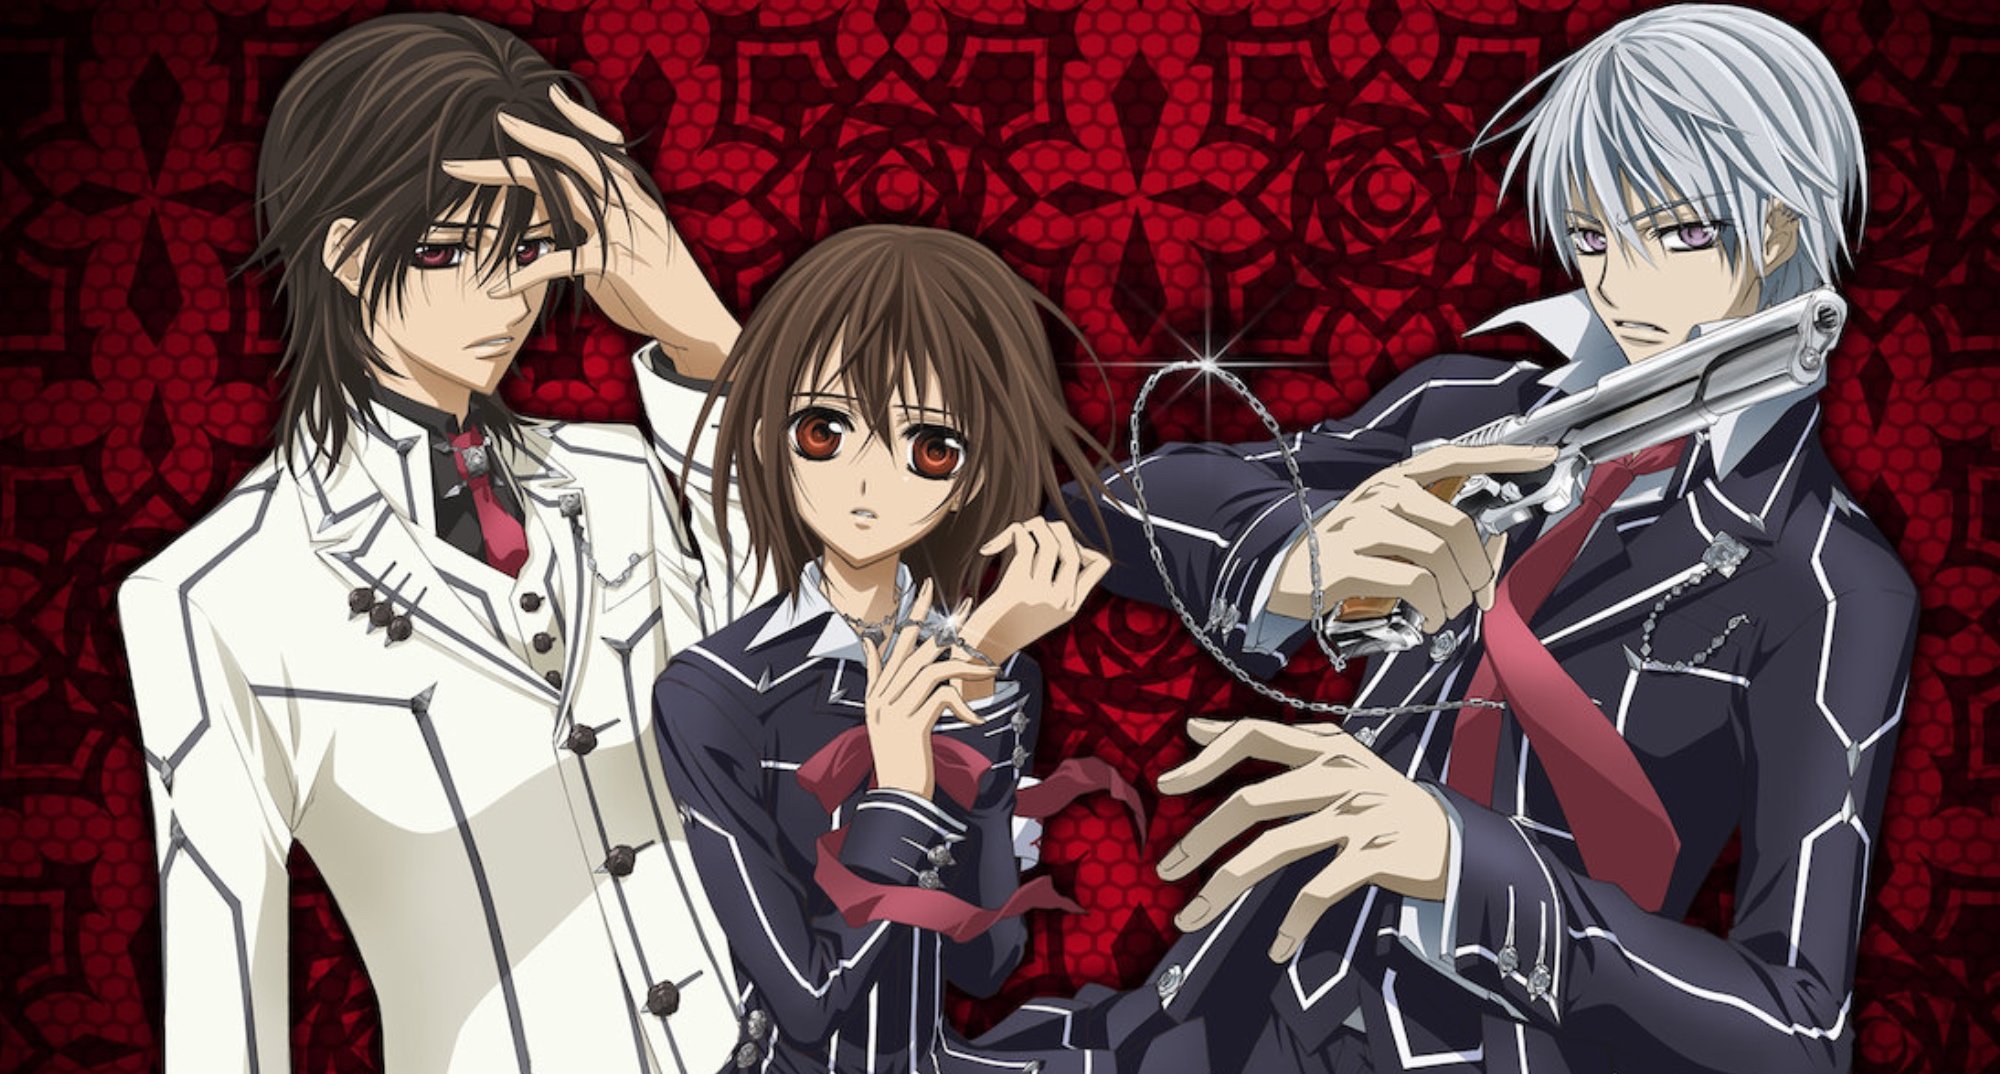 'Vampire Knight' leading anime characters wearing Cross Academy uniforms in relation to season 3.